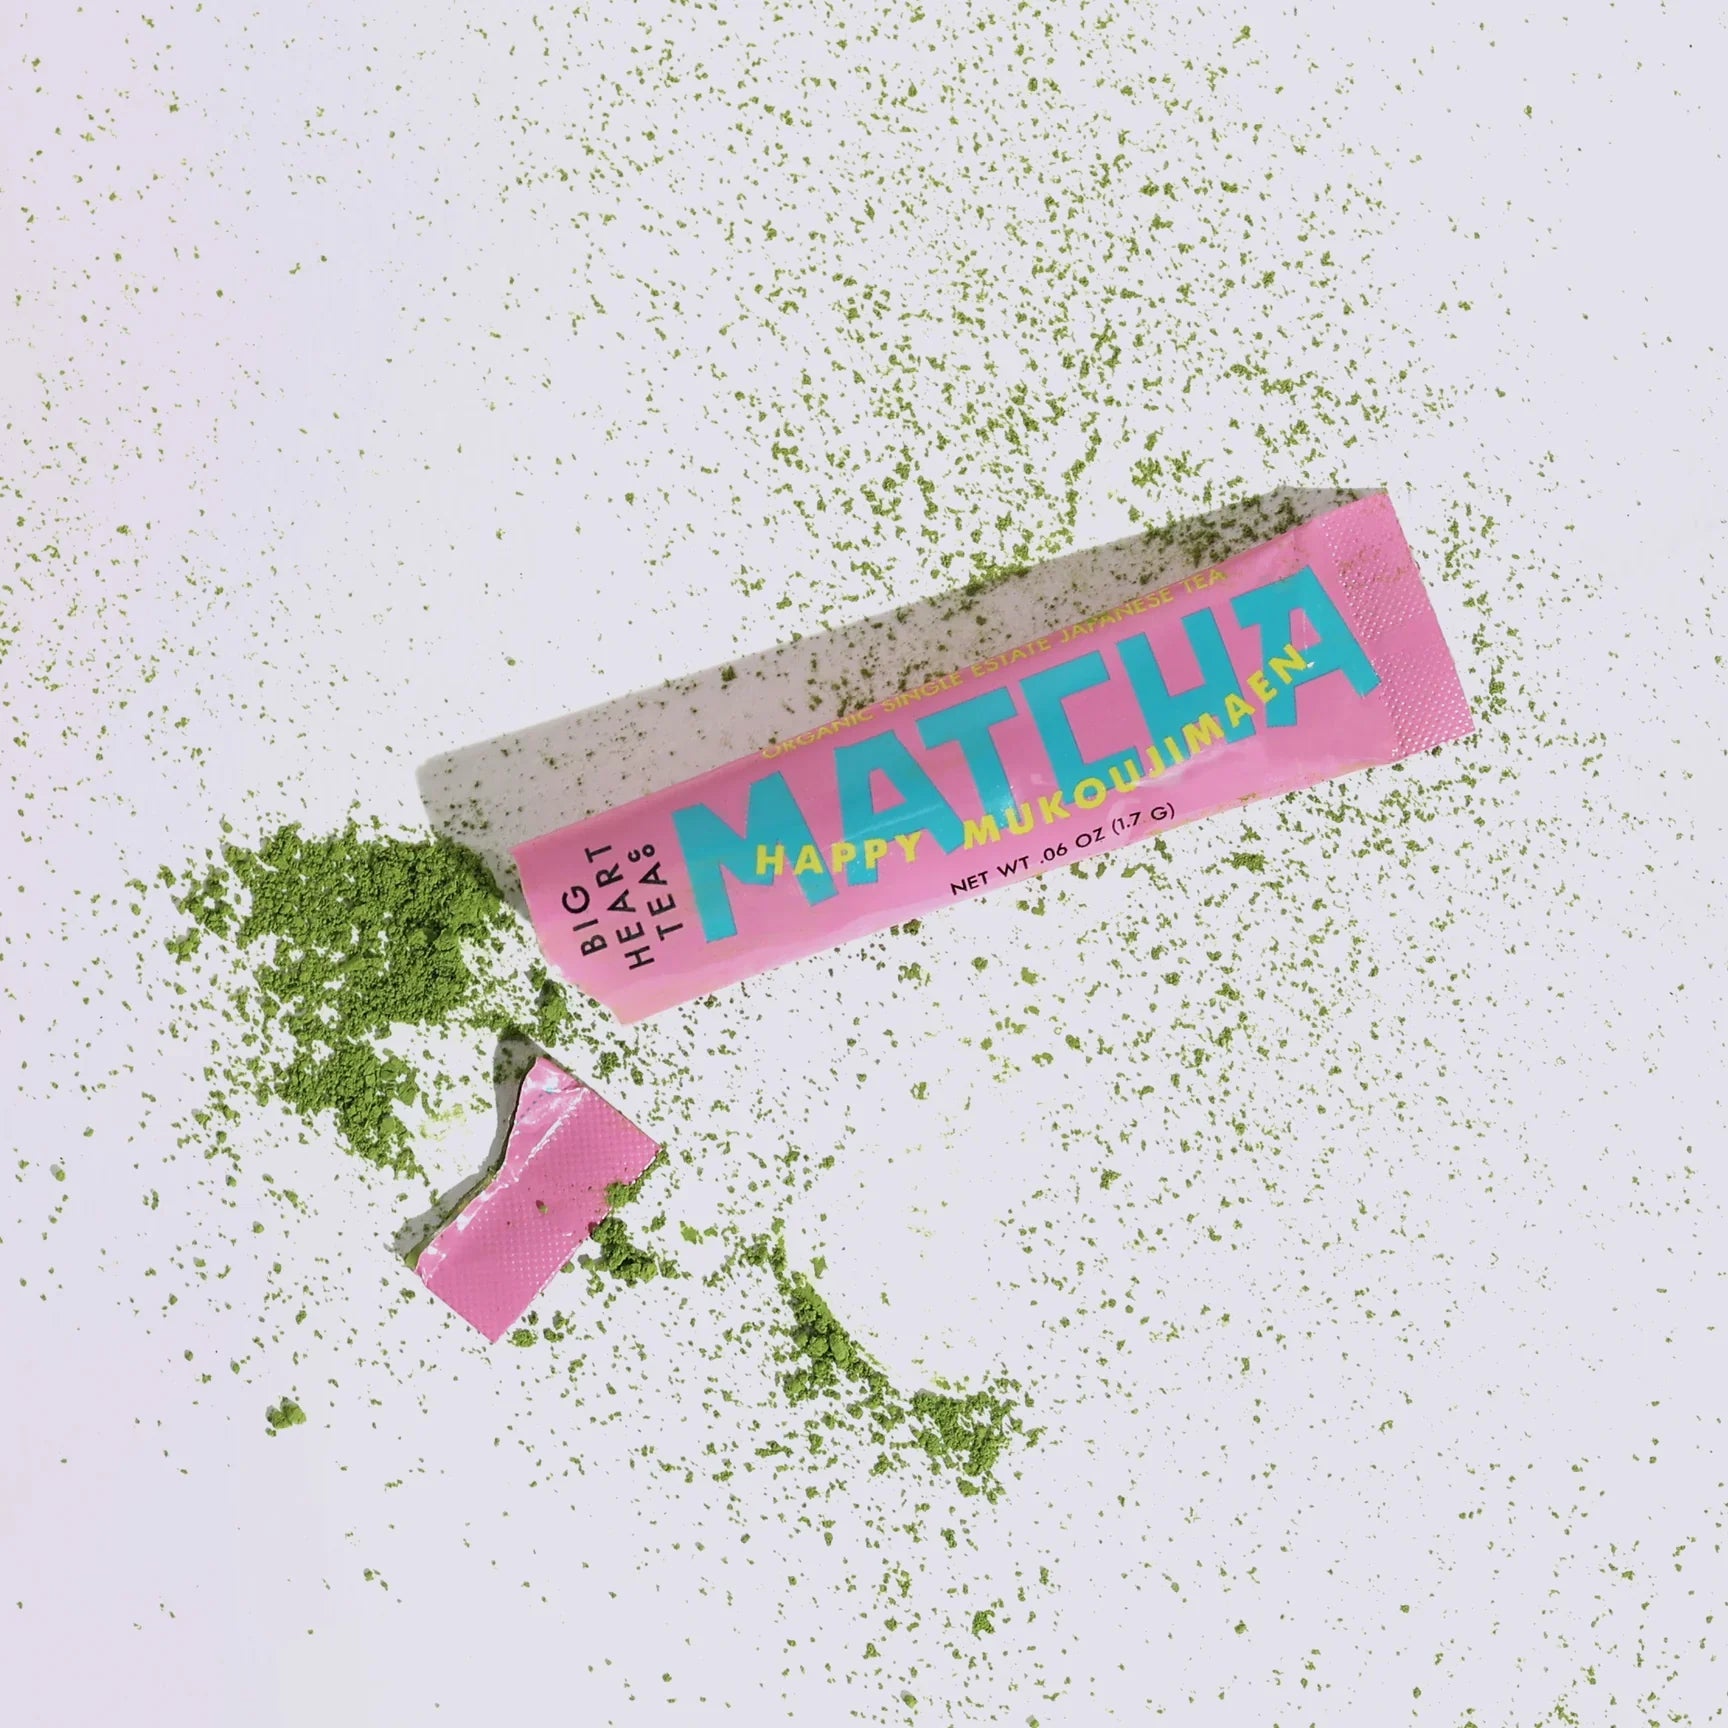 Happy Matcha Stick ripped open and surrounded by matcha powder